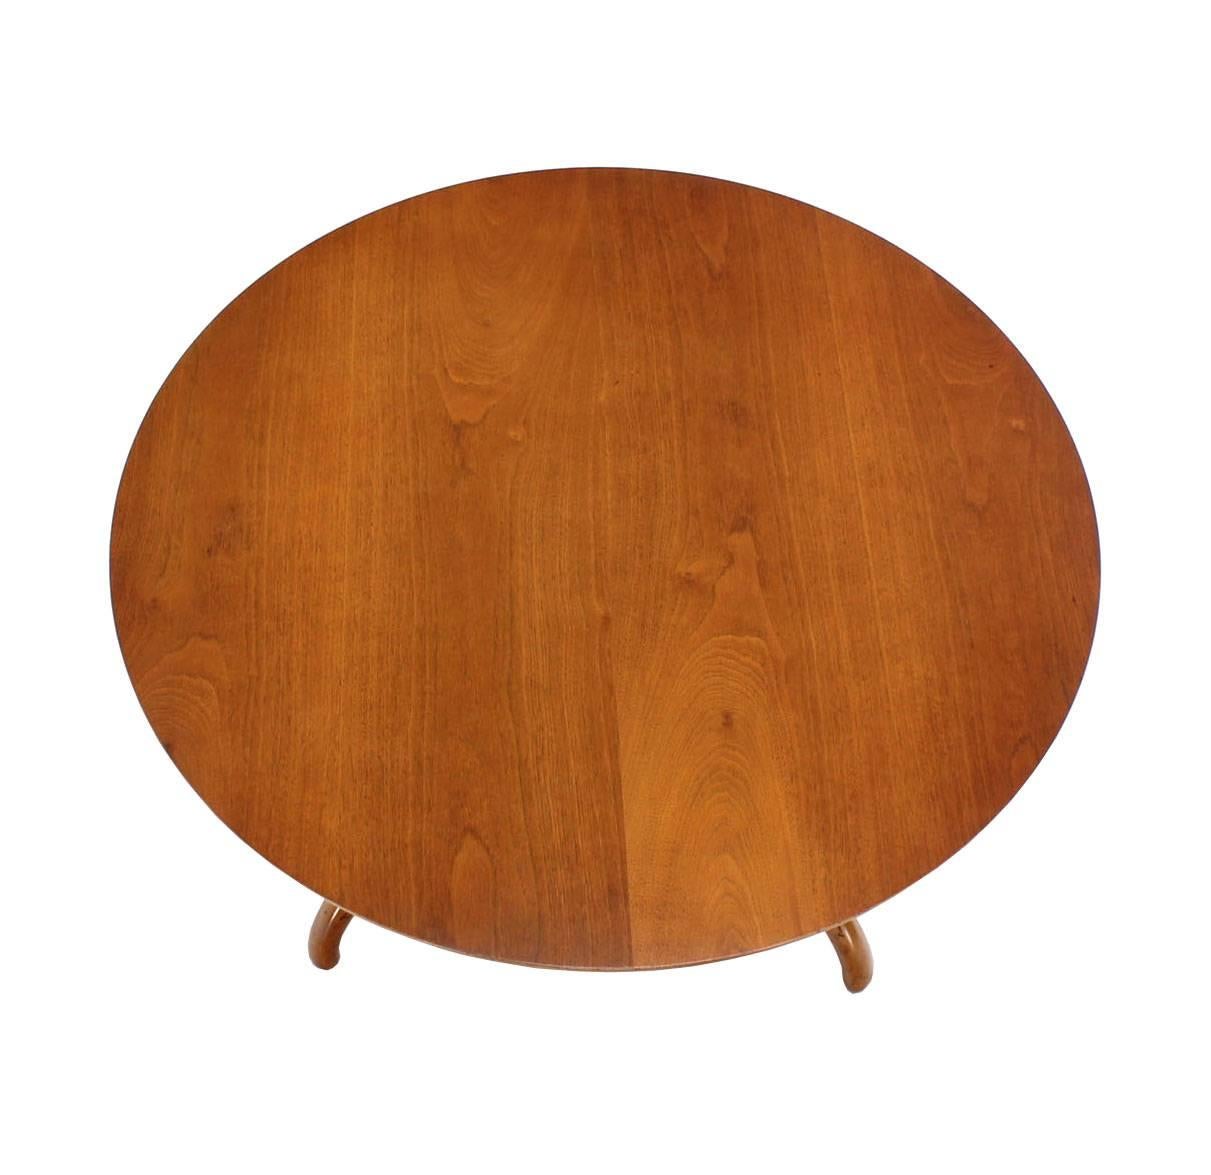 American Sculptural Solid Walnut Base Round Coffee Table by Henredon Spider Slay Leg